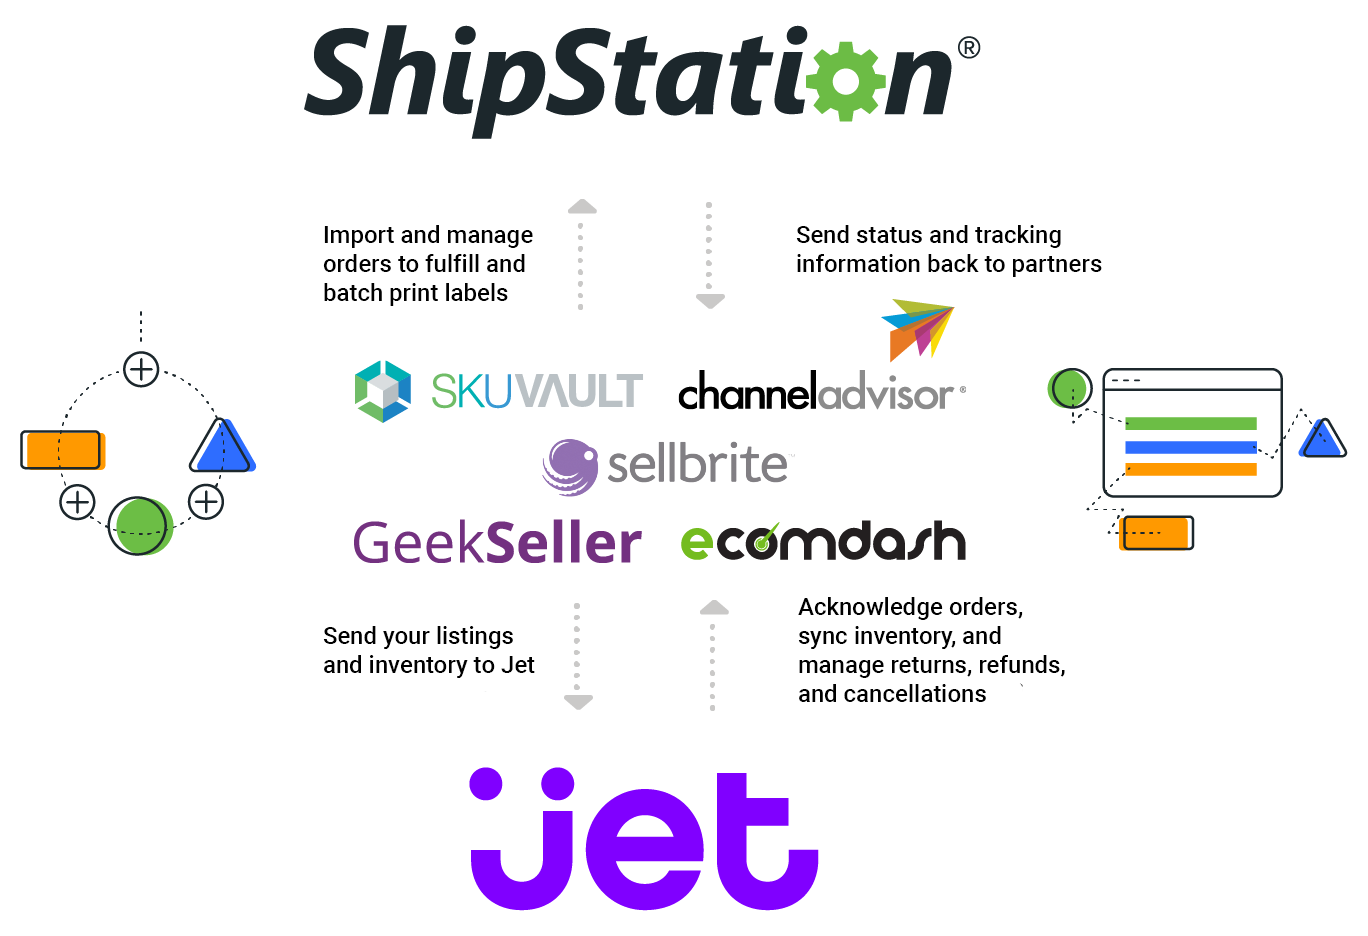 How ShipStation and Jet work with listing partners